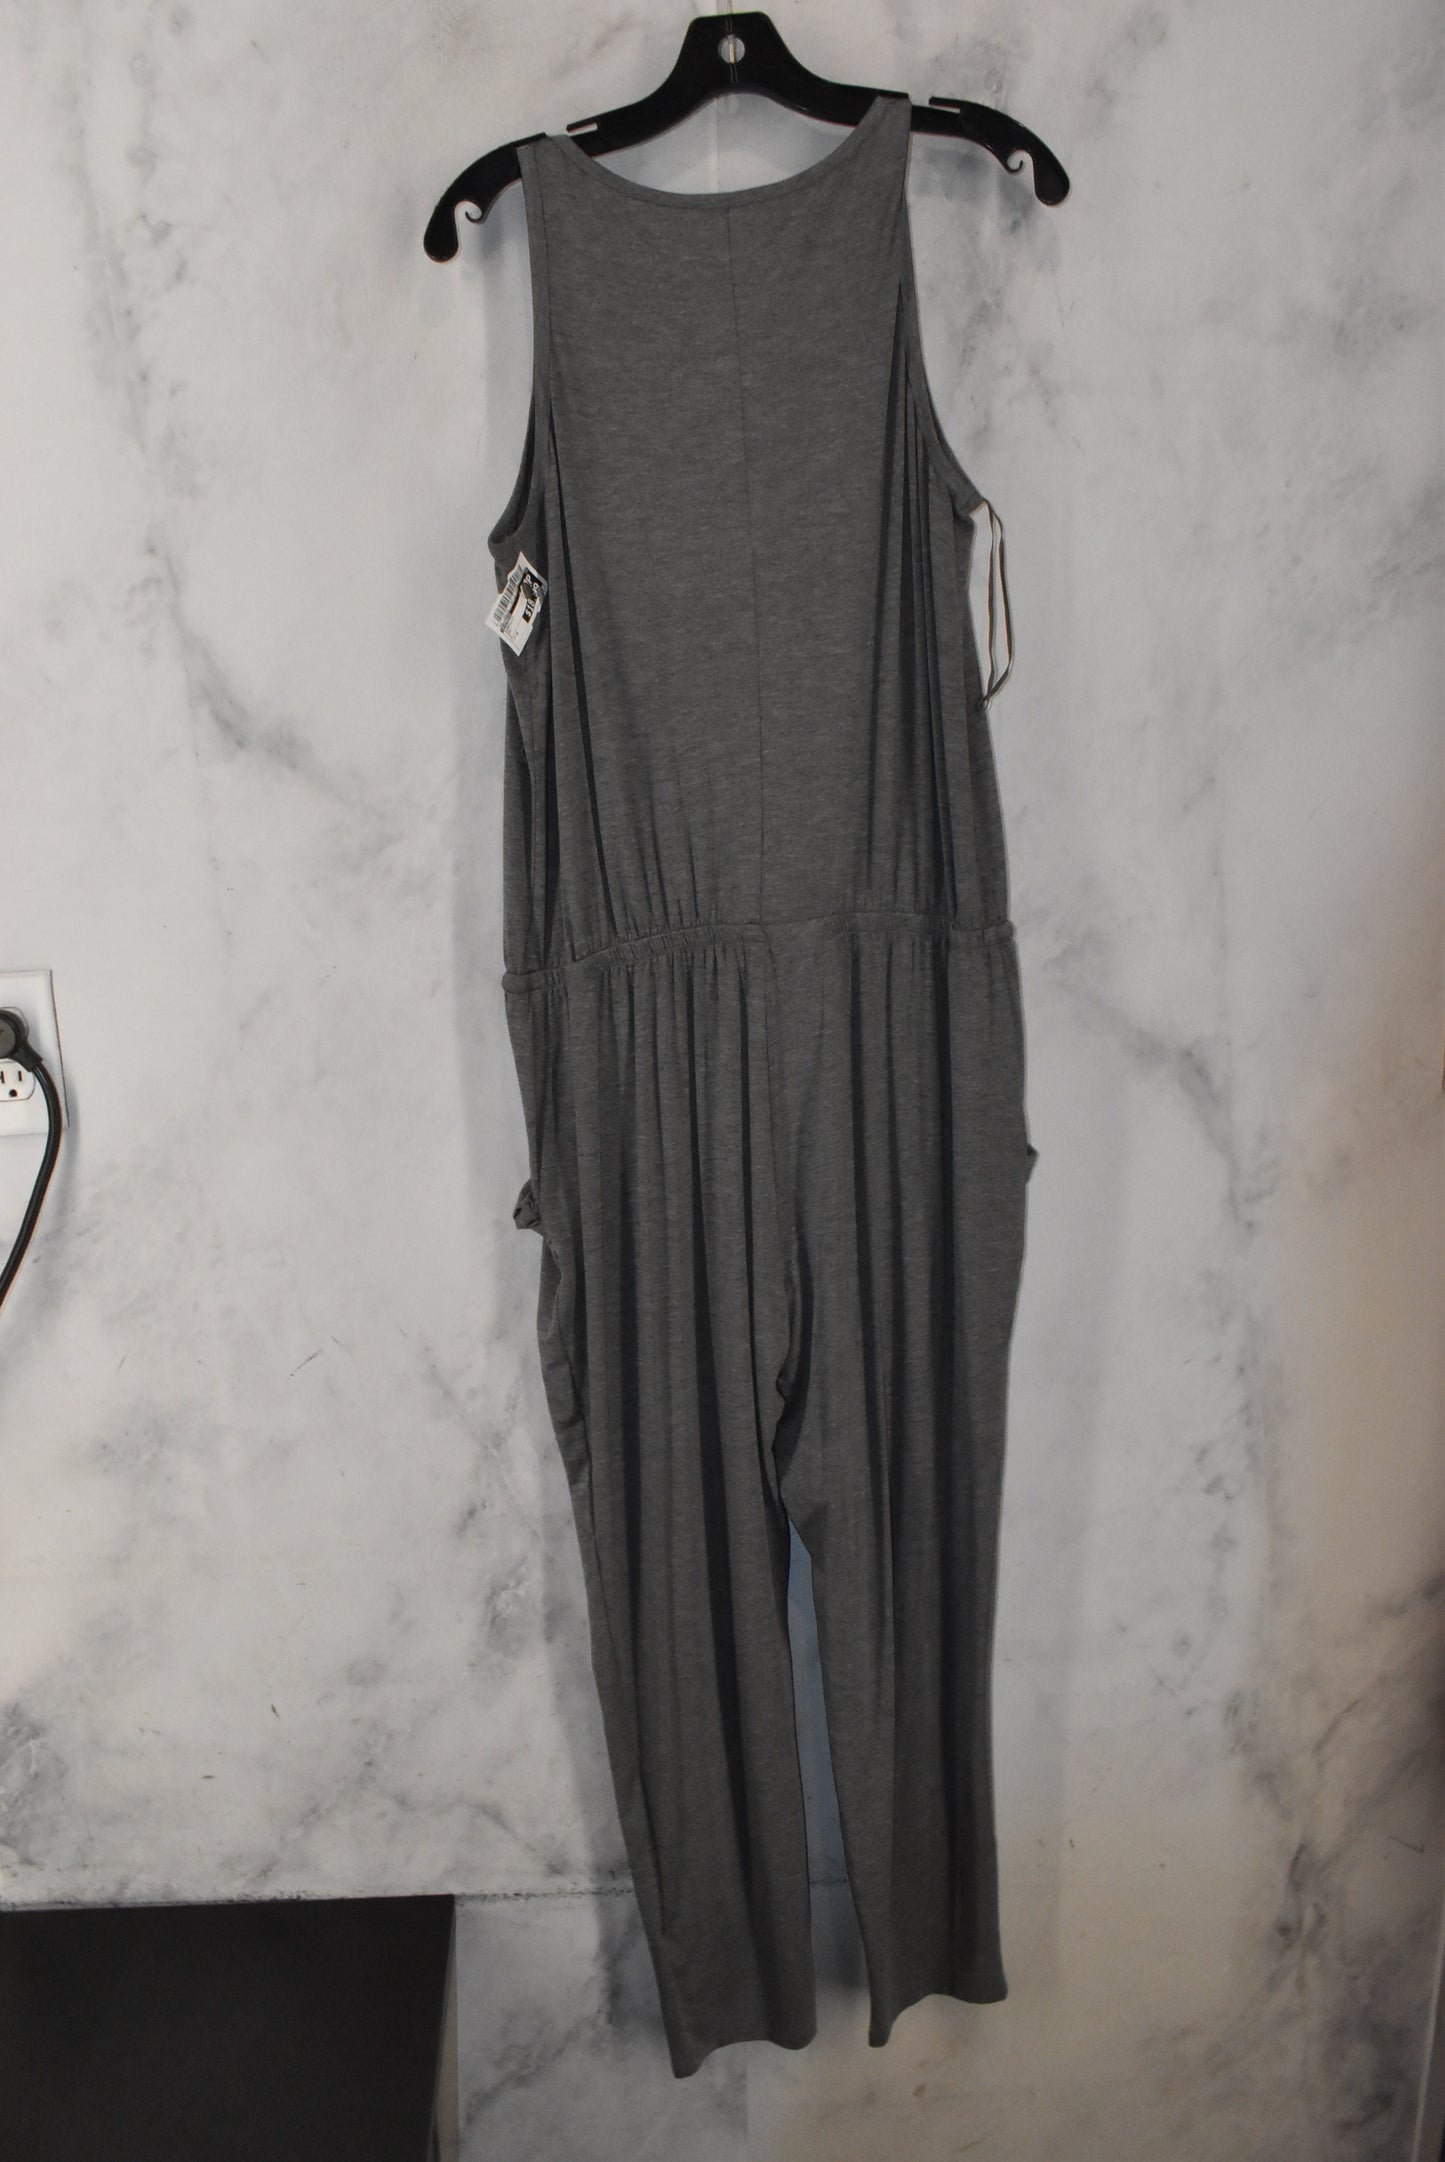 Jumpsuit By Express  Size: M